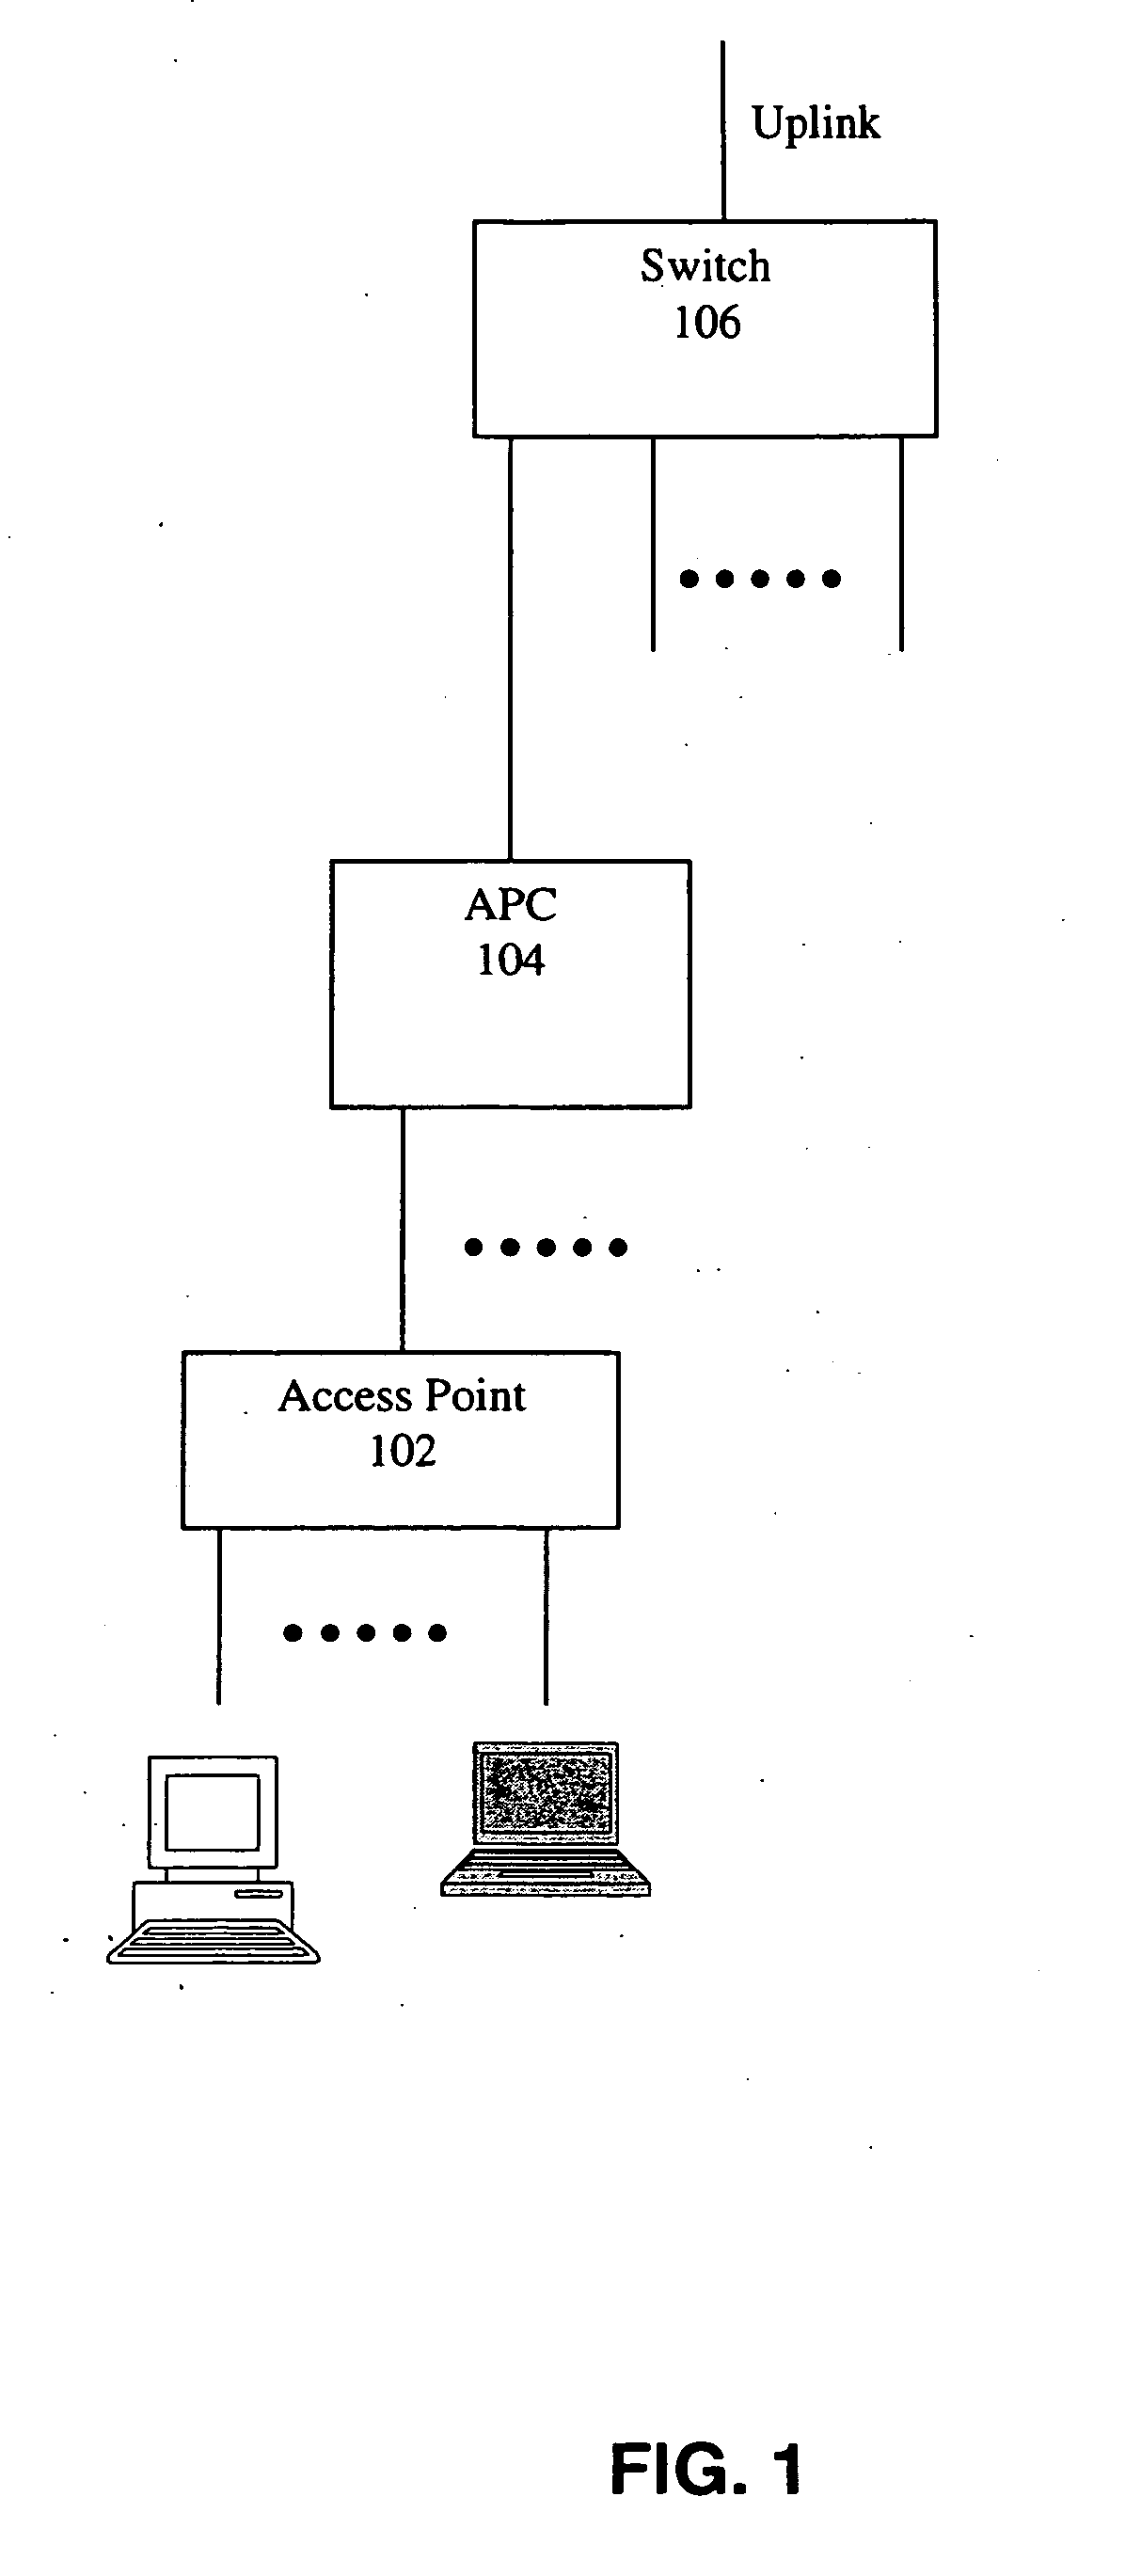 Unified wired and wireless switch architecture